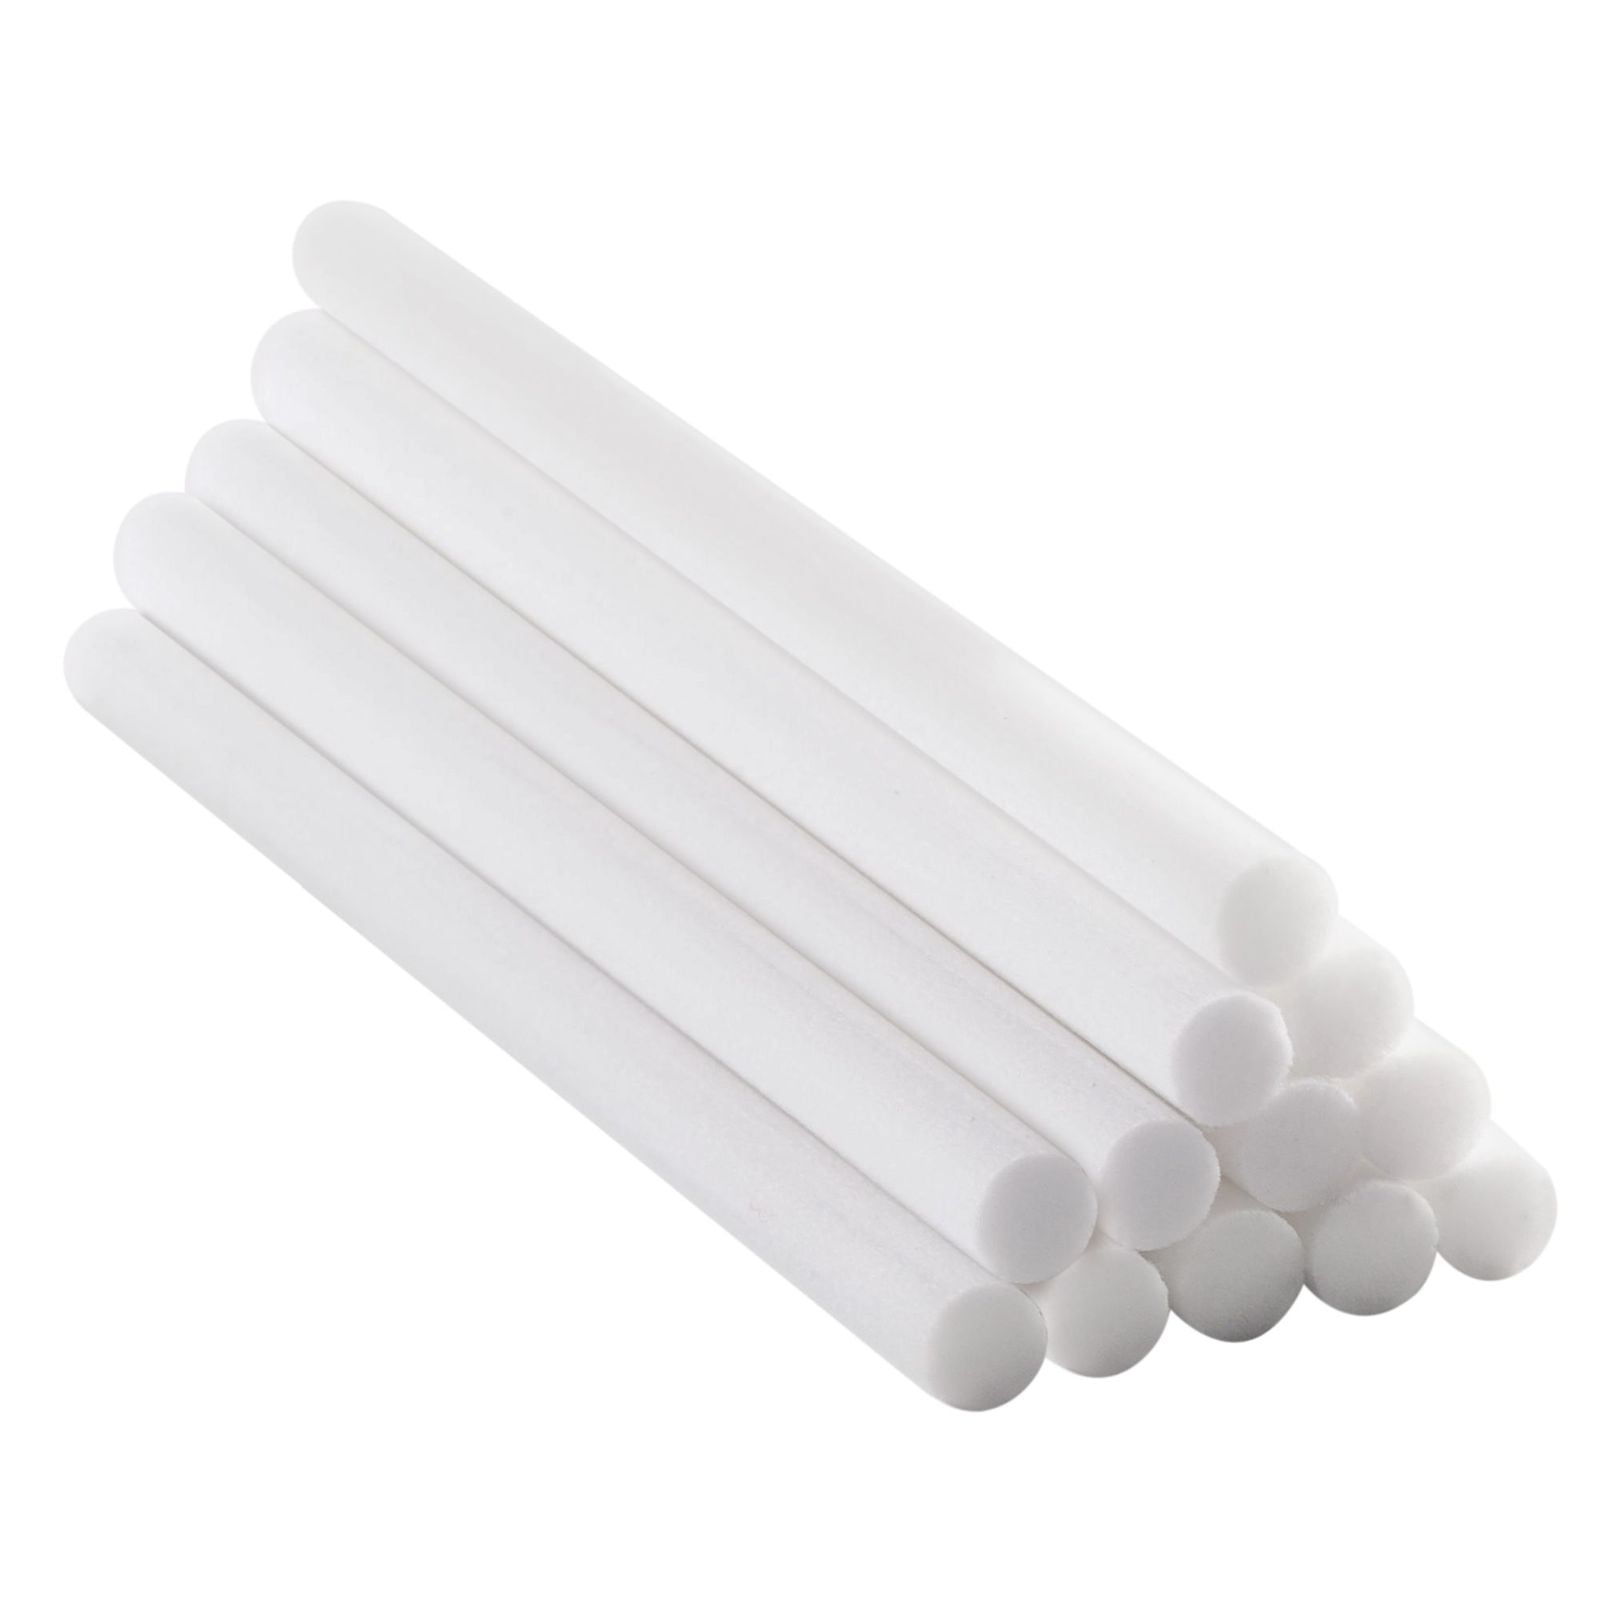 Rfvtgb 40Pcs Cotton Swab Filters Refill Sticks Replacement Wicks for Portable Personal USB Powered Humidifiers Aroma Maker 